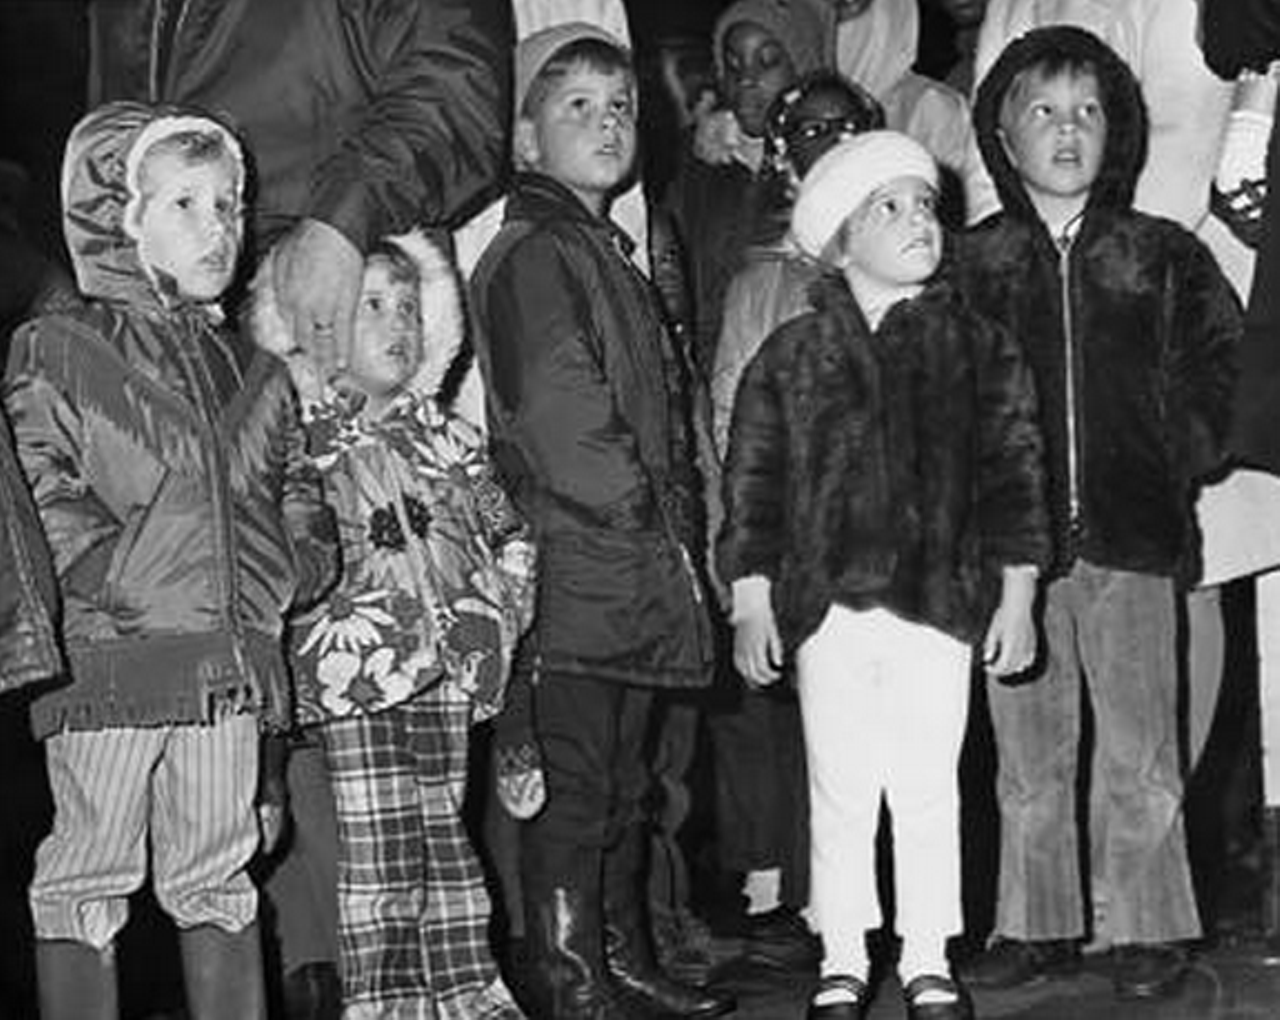 Watching the Christmas Tree lighting in Shaker Square, 1970.